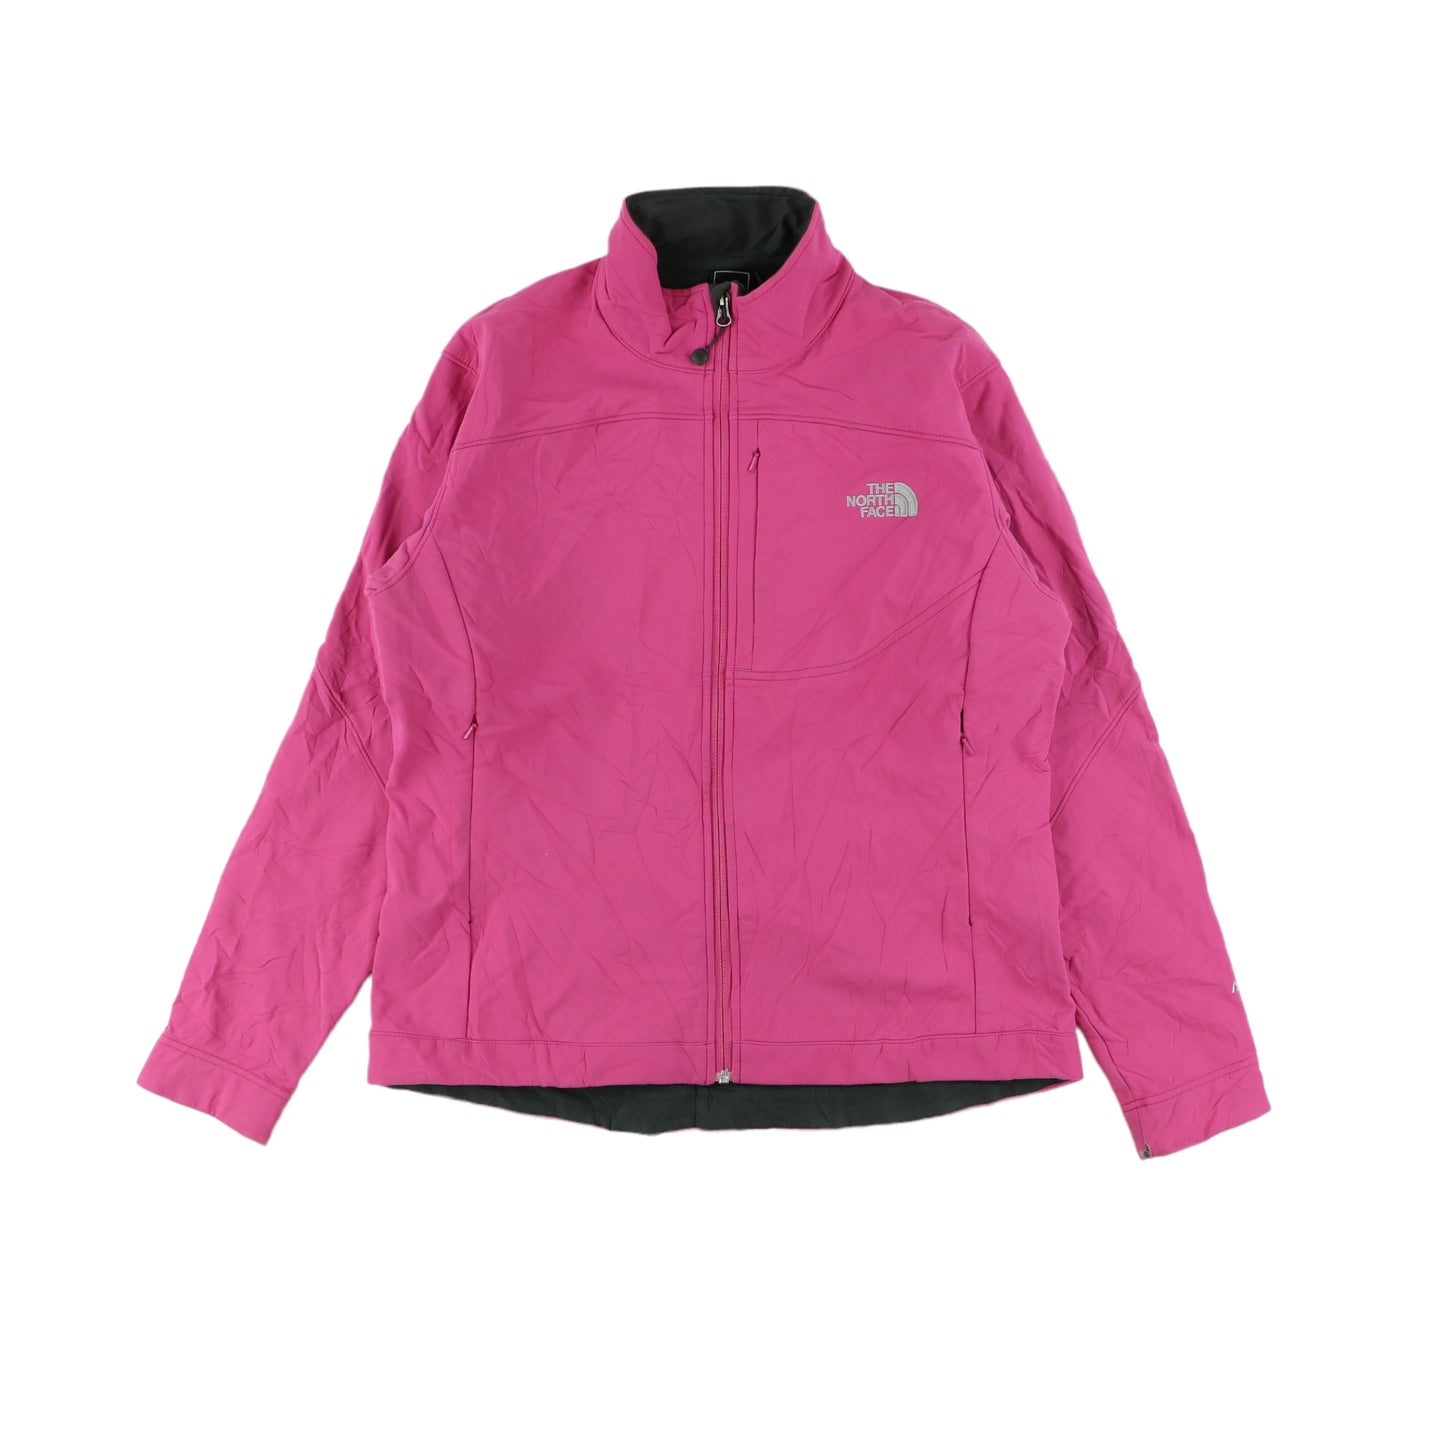 The North Face Jacket (L)